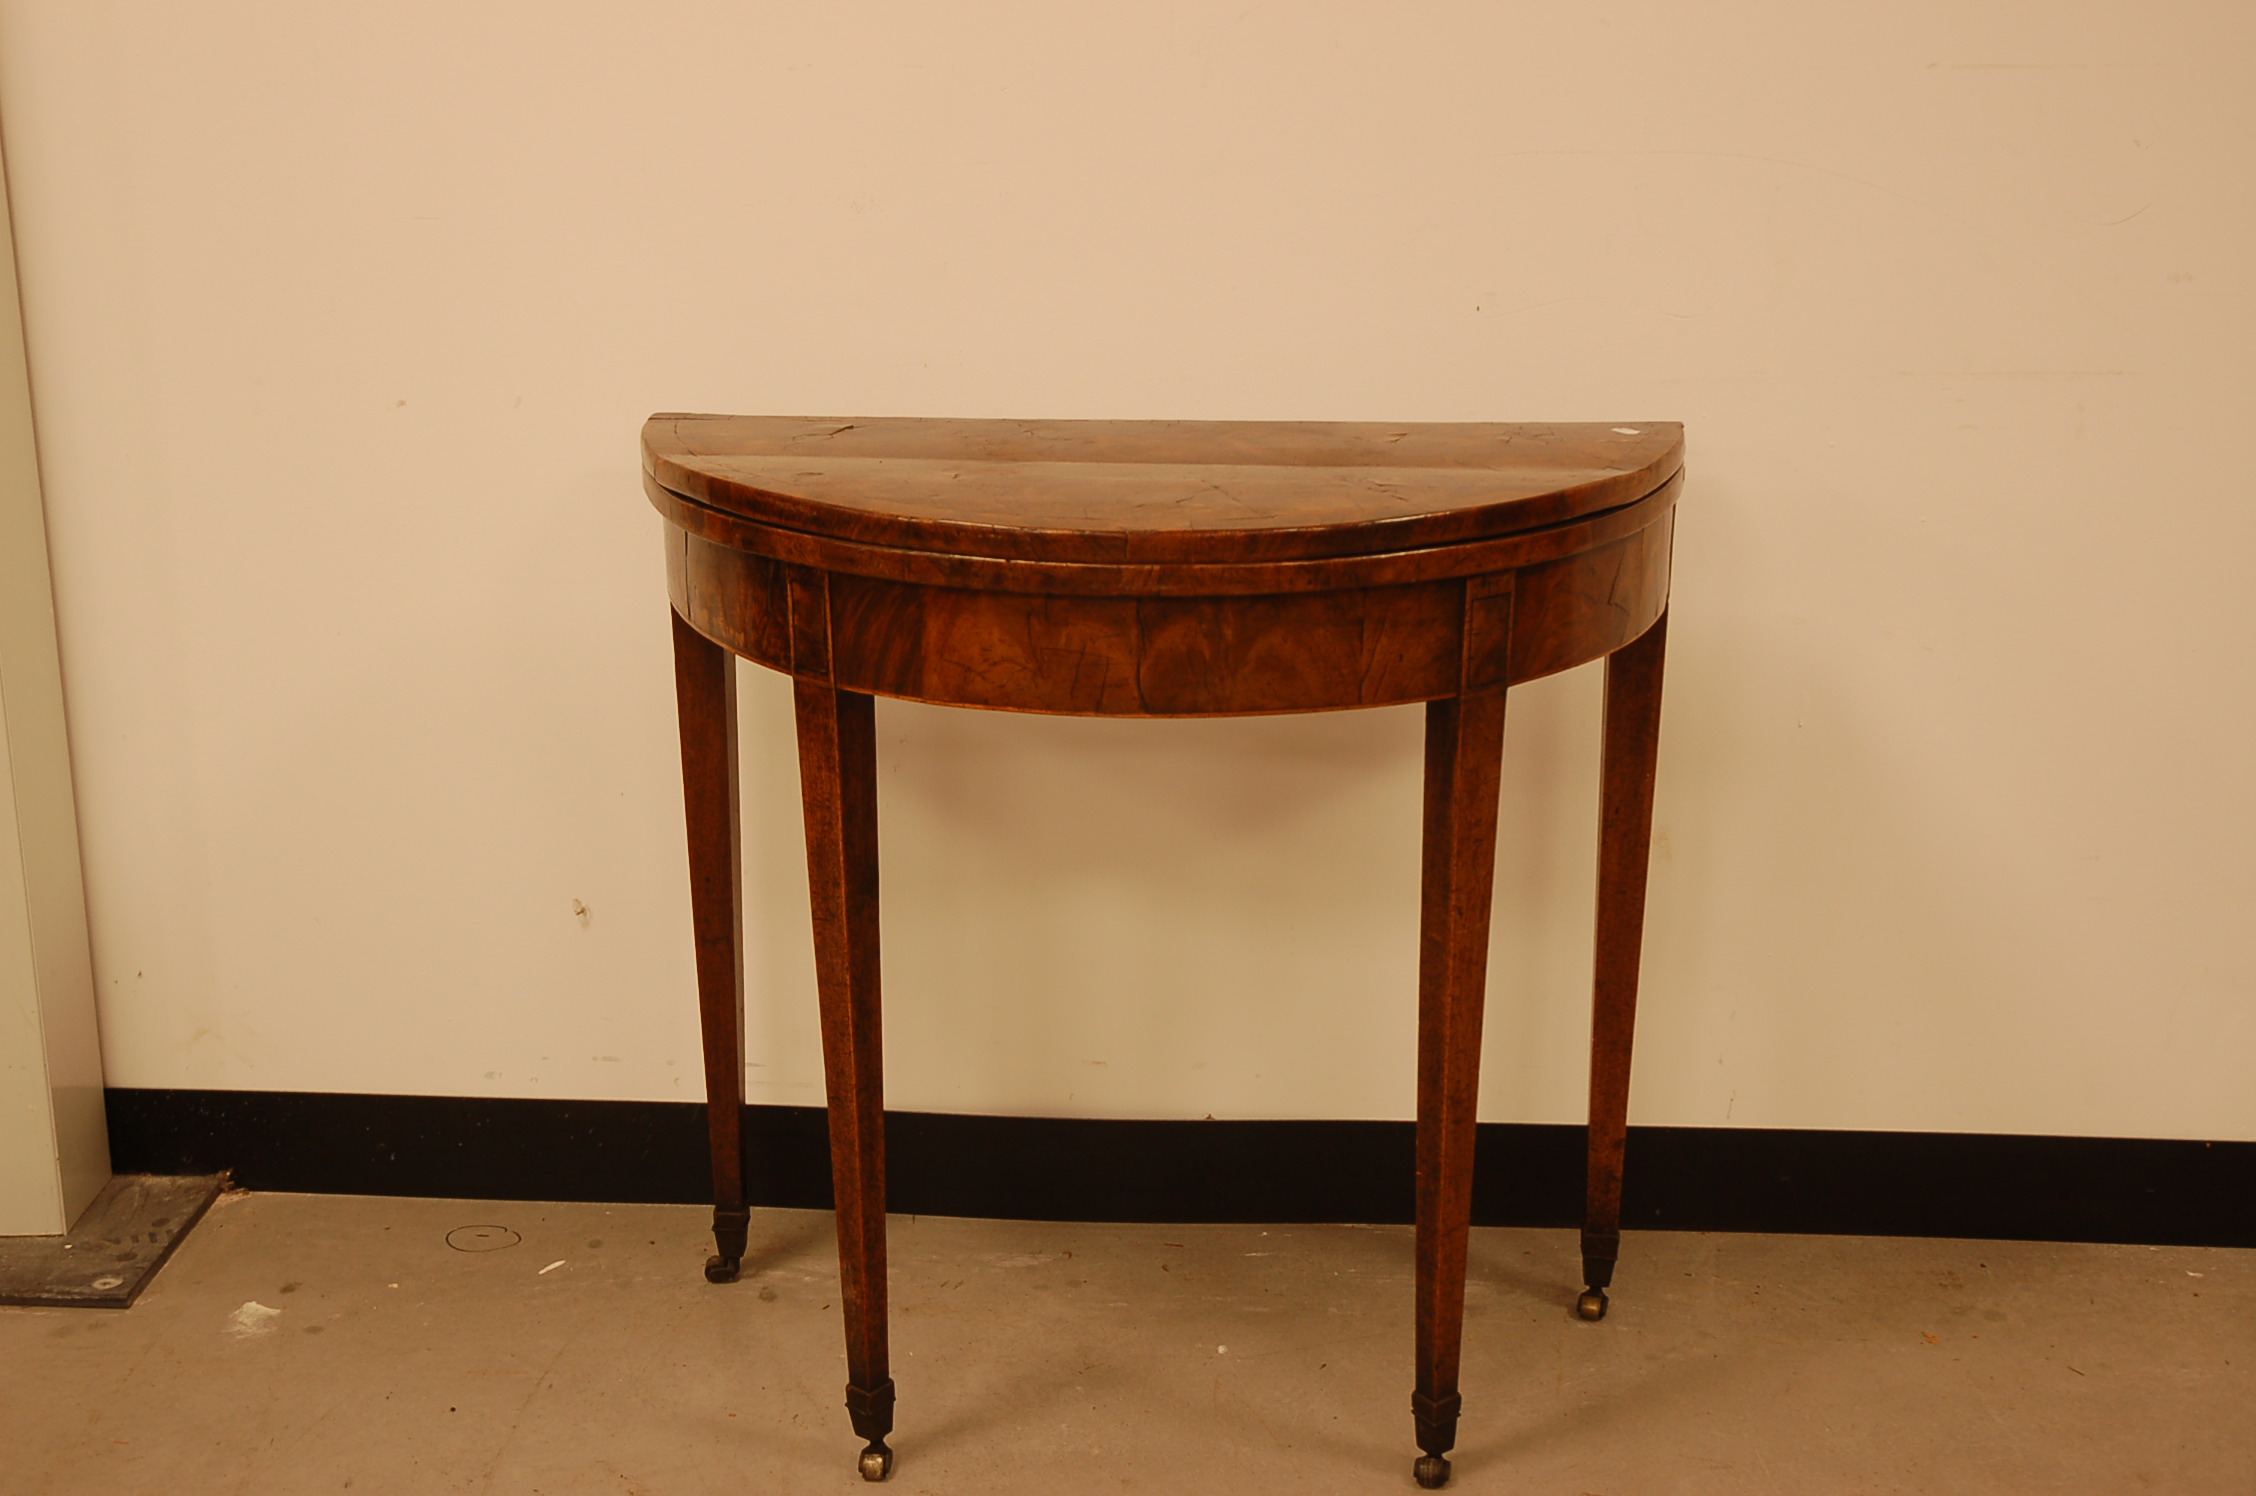 A 19th century mahogany and inlaid demi-lune card table, 78cm wide, on casters